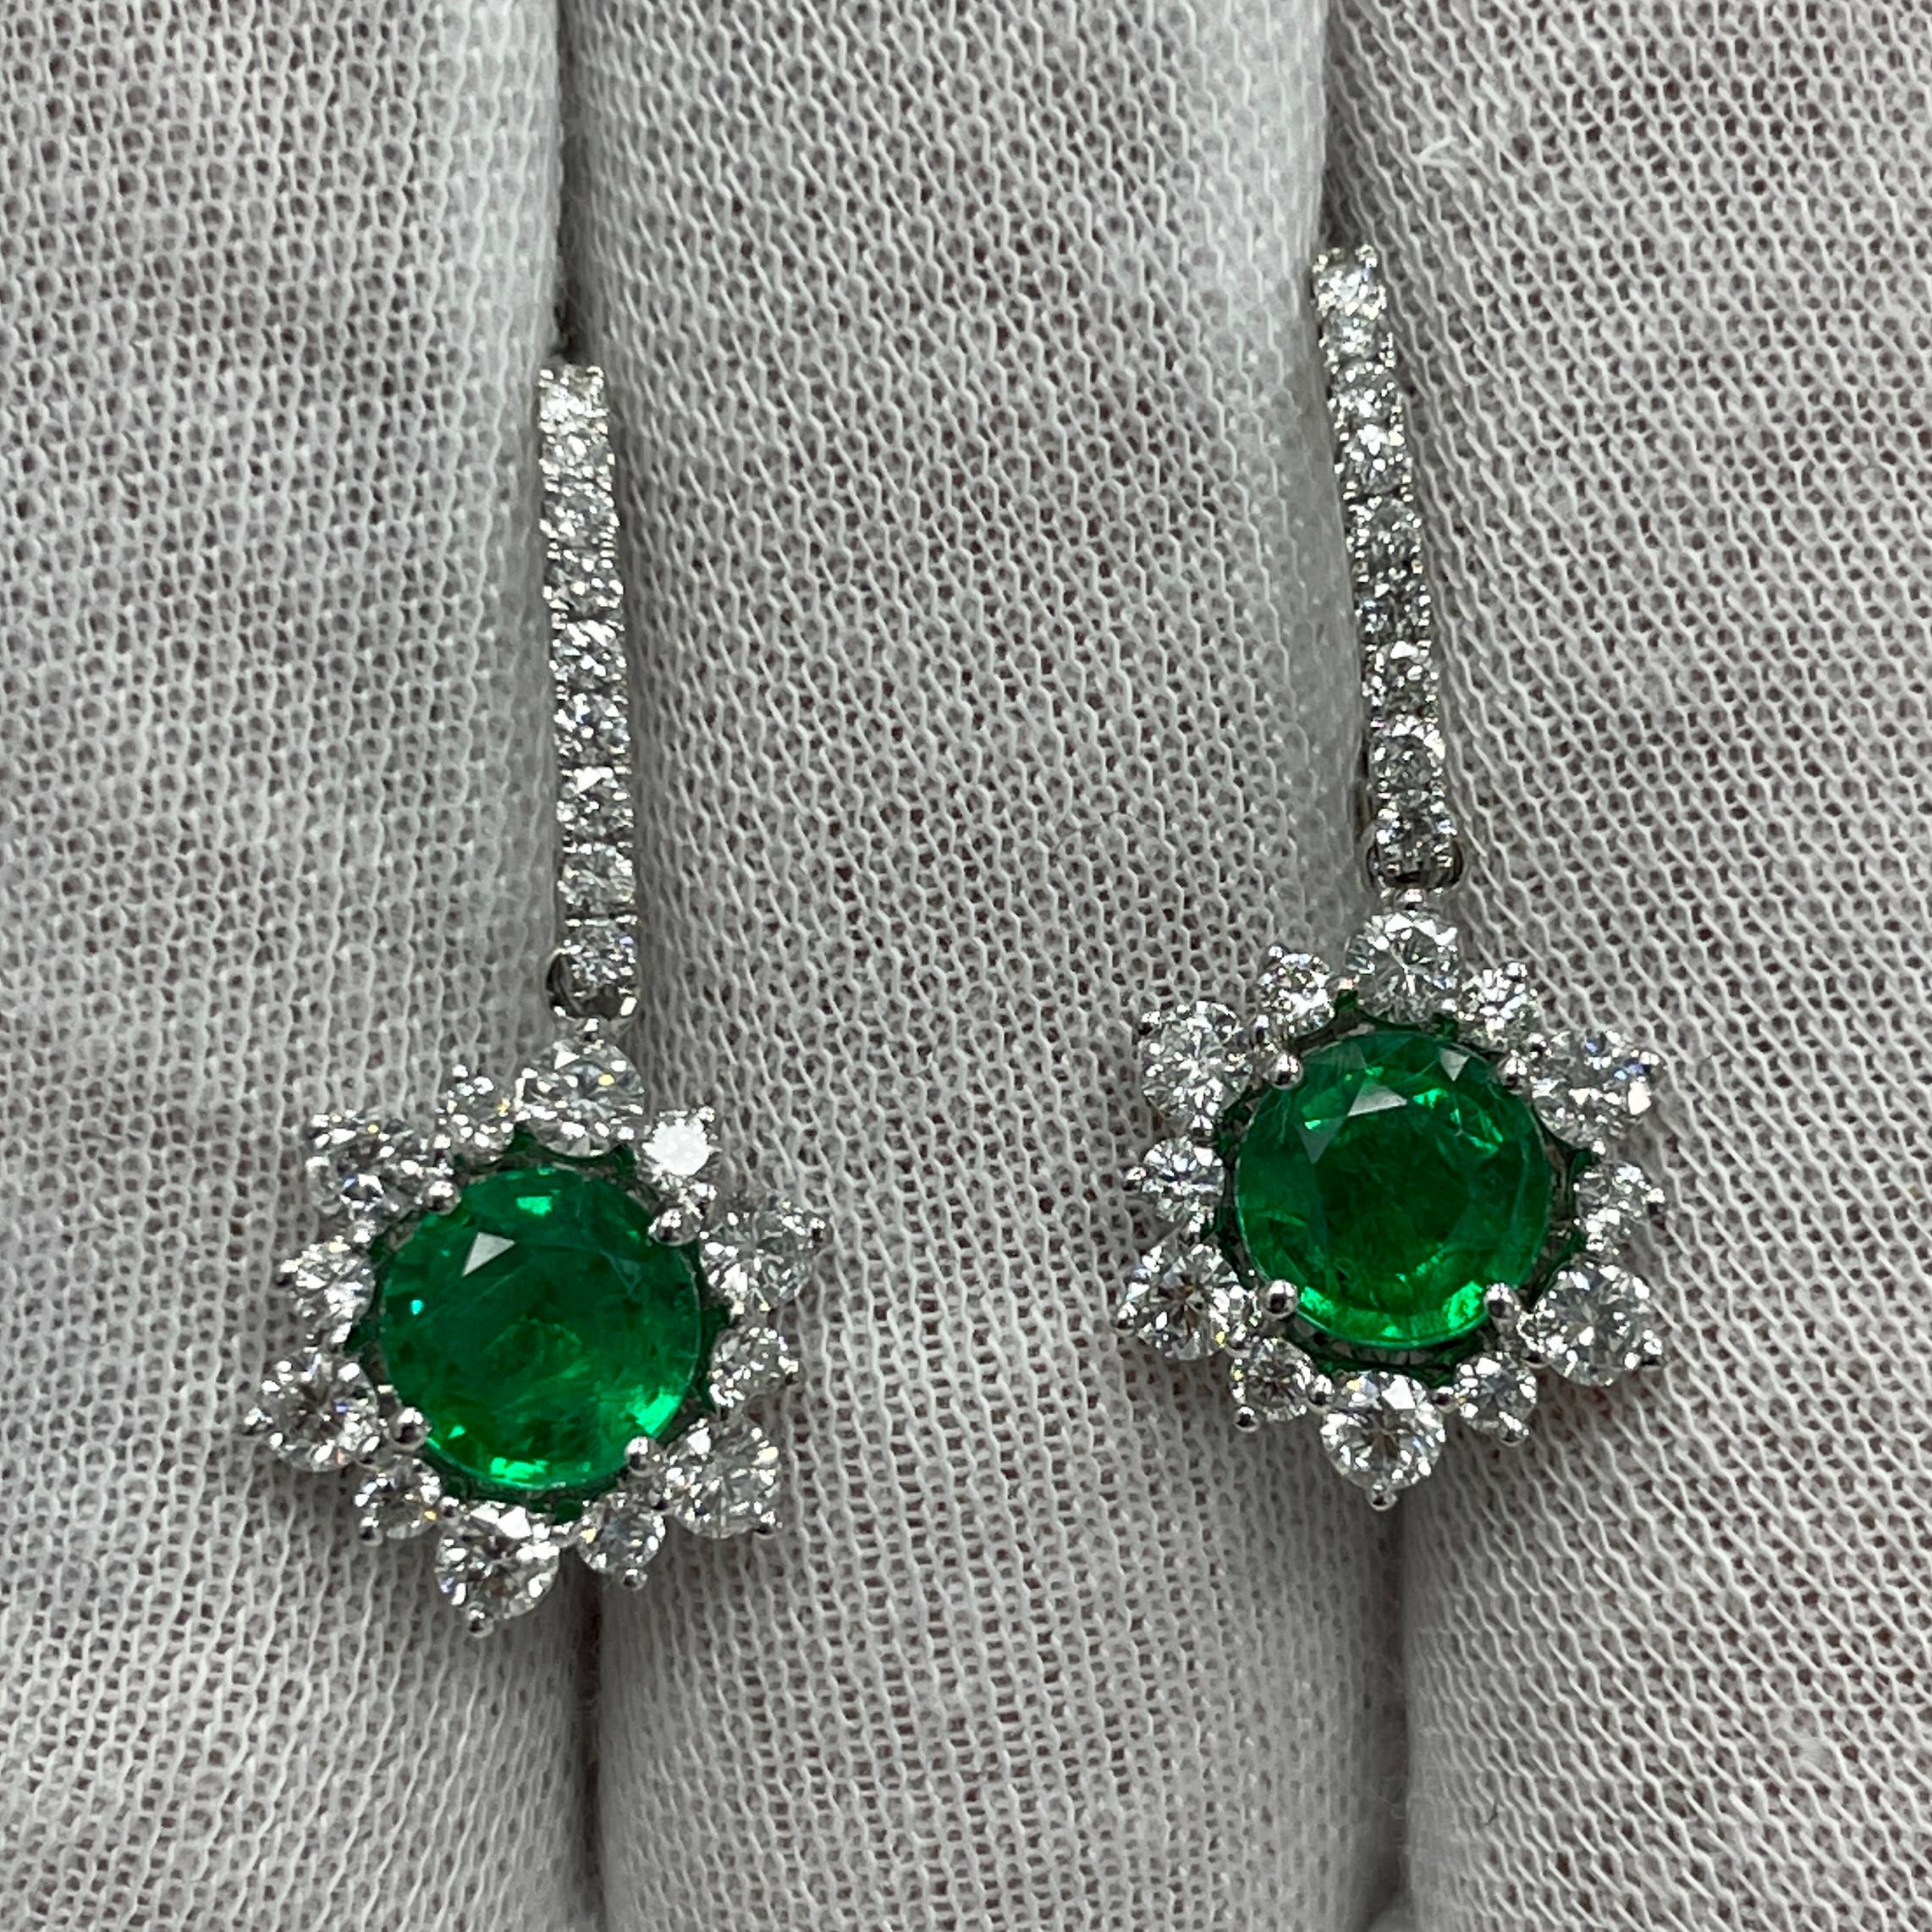 These dangling 18K white gold earrings carry 1.50Ct of brilliant white diamonds and 2.27Ct of stunning matching round emeralds